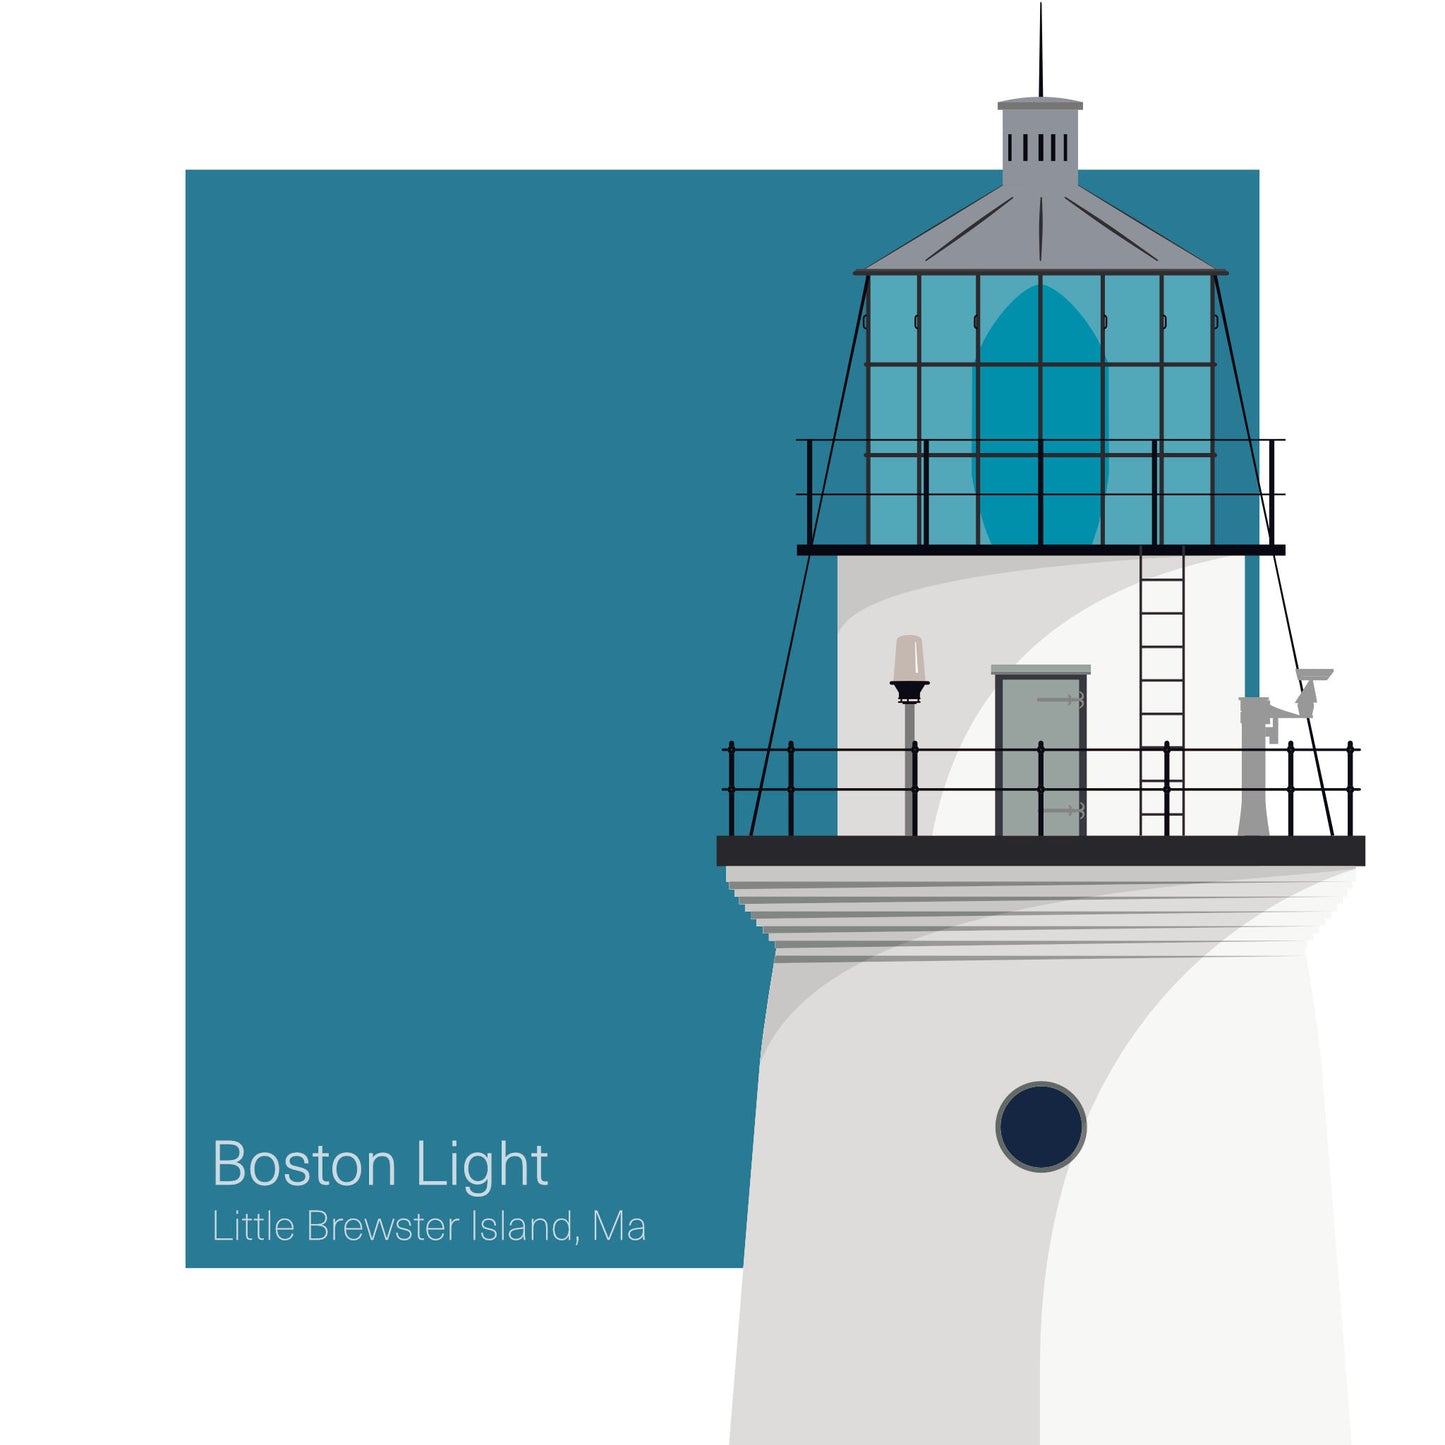 Illustration of the Boston Light lighthouse on Little Brewster Island, Boston, MA, USA. On a white background with aqua blue square as a backdrop.